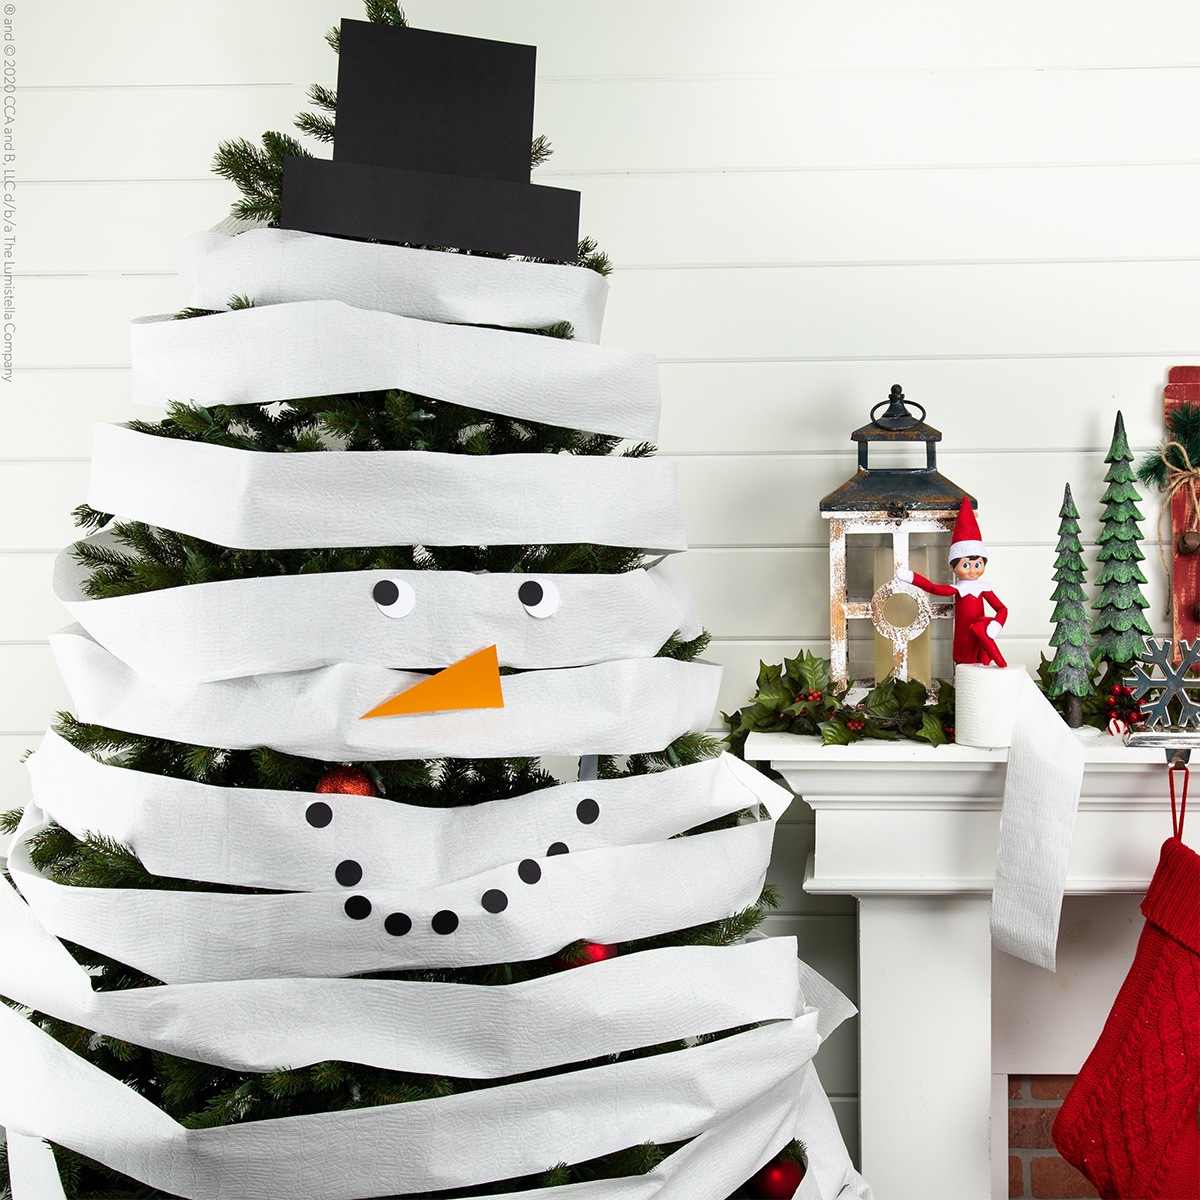 Christmas tree wrapped in toilet paper to be a snowman